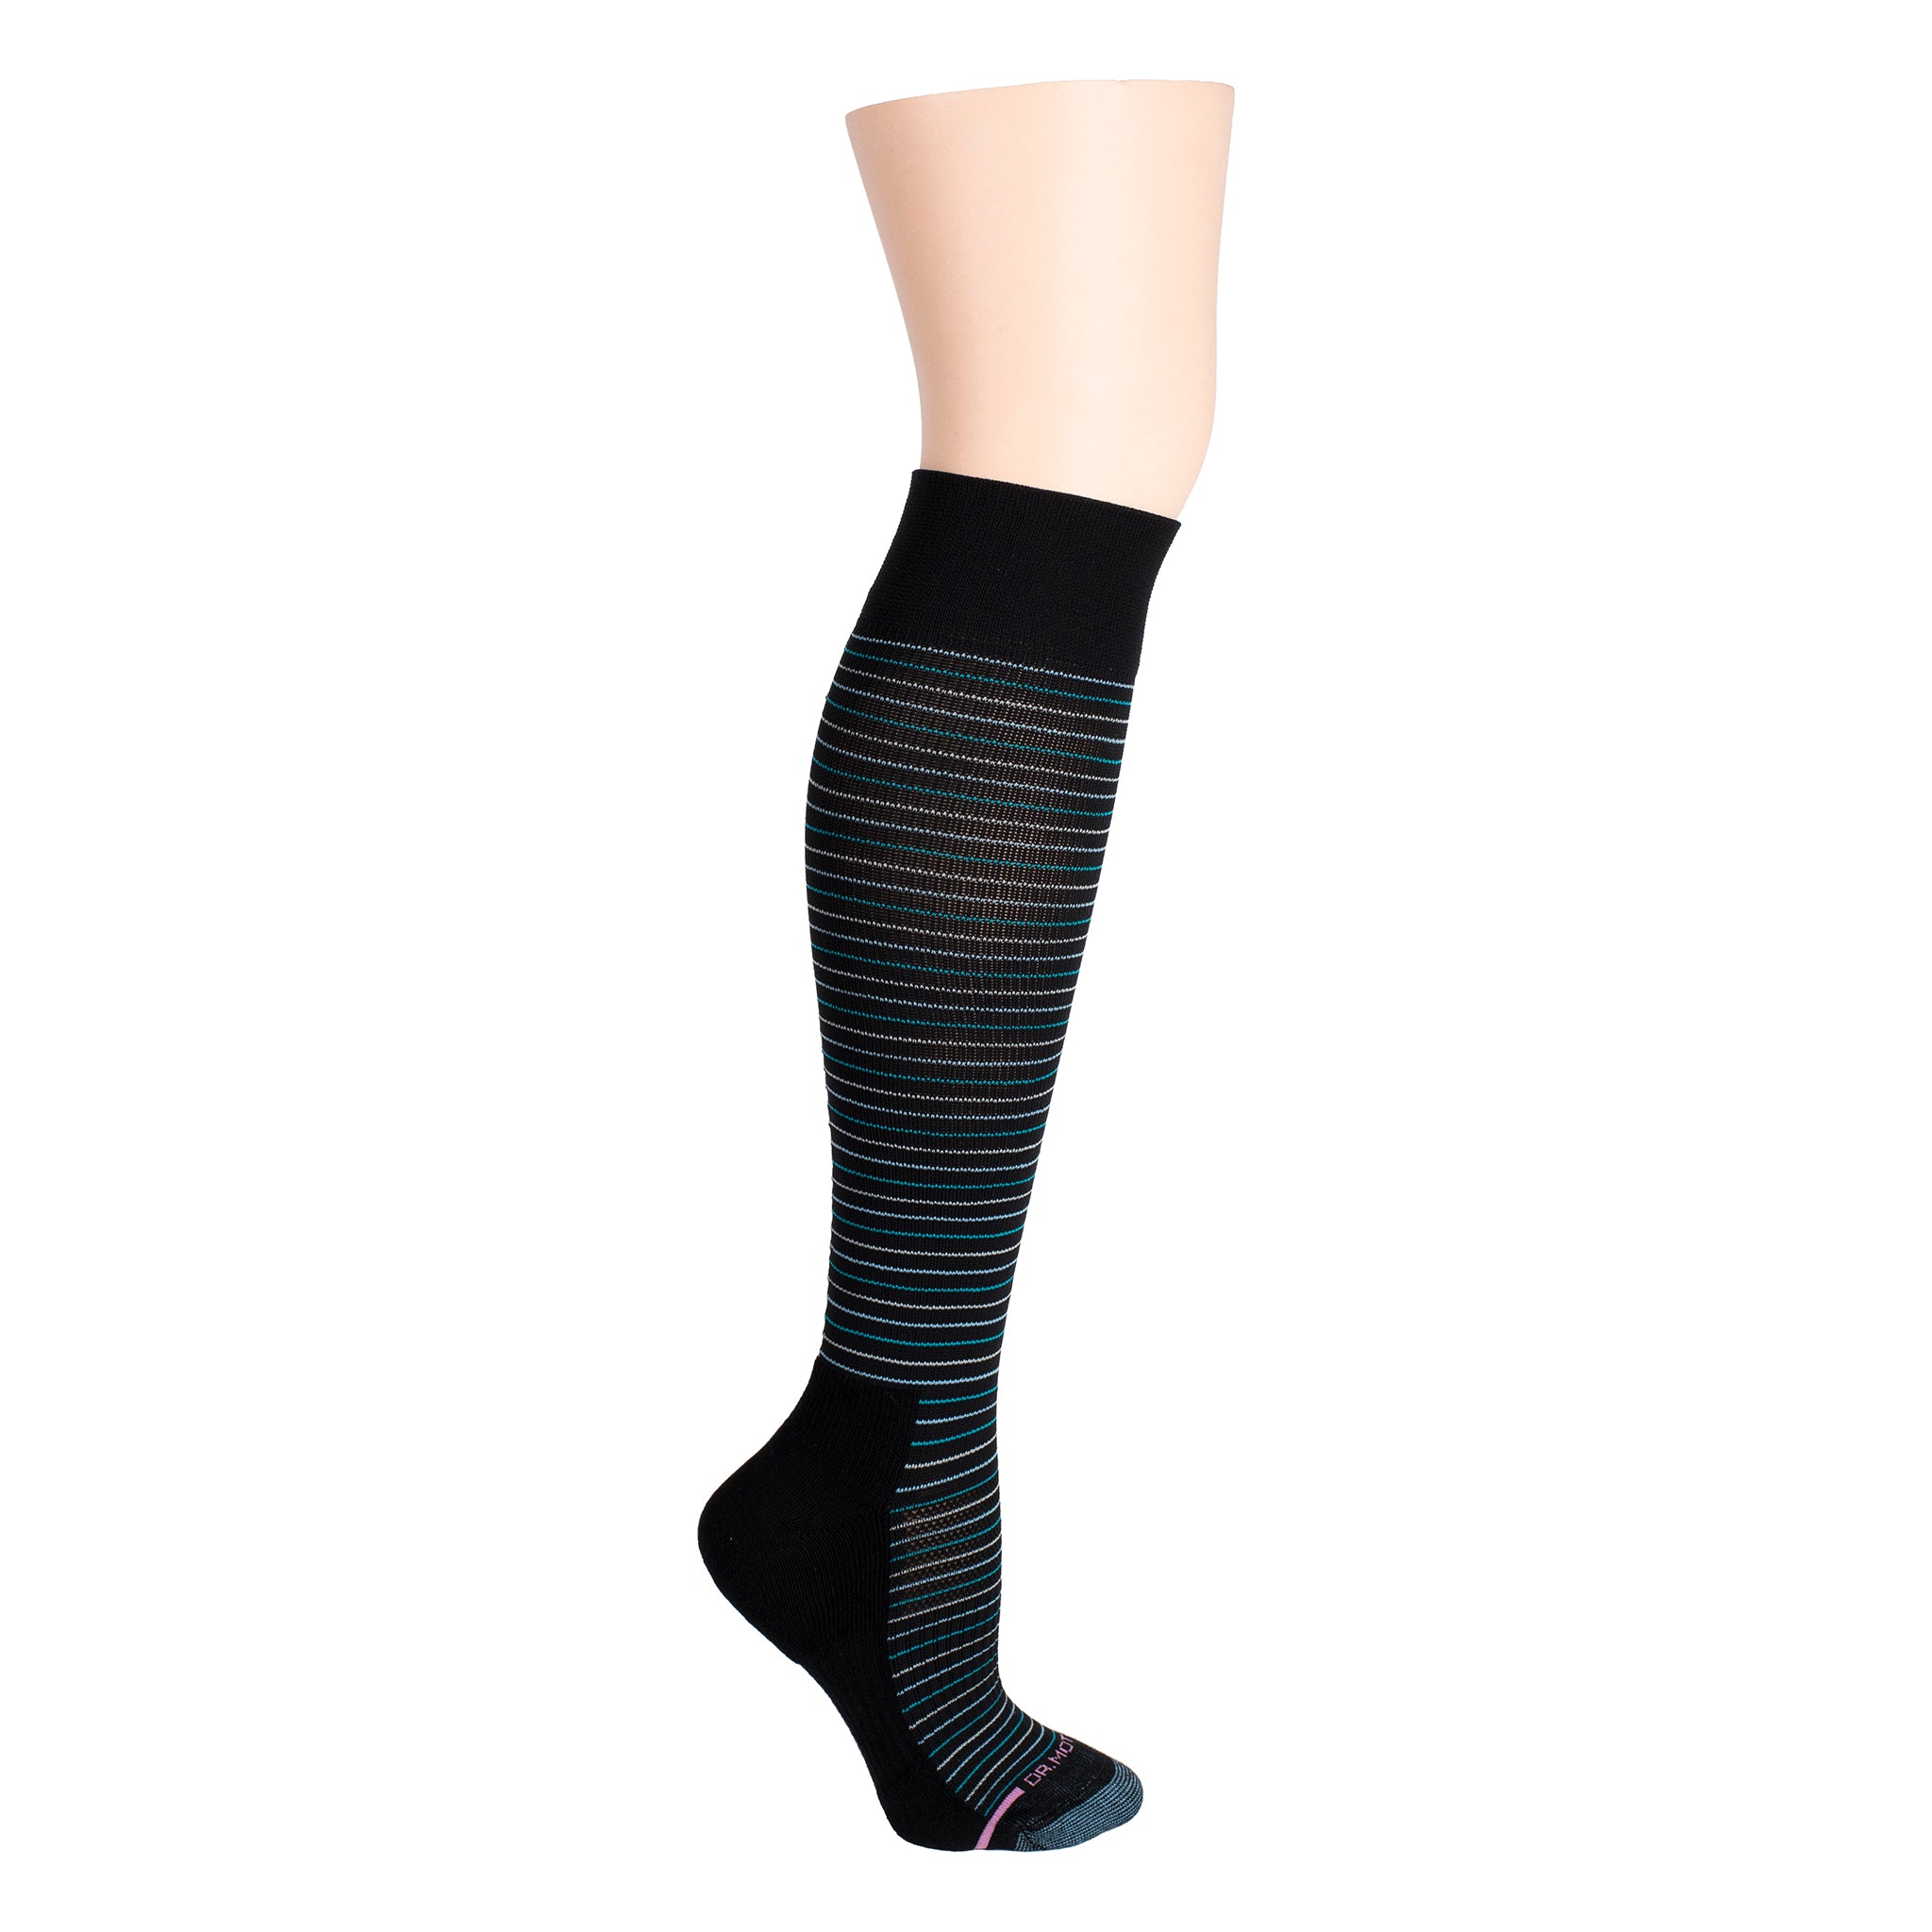 Knee-High Compression Socks with Half Cushion for Women, Dr. Motion